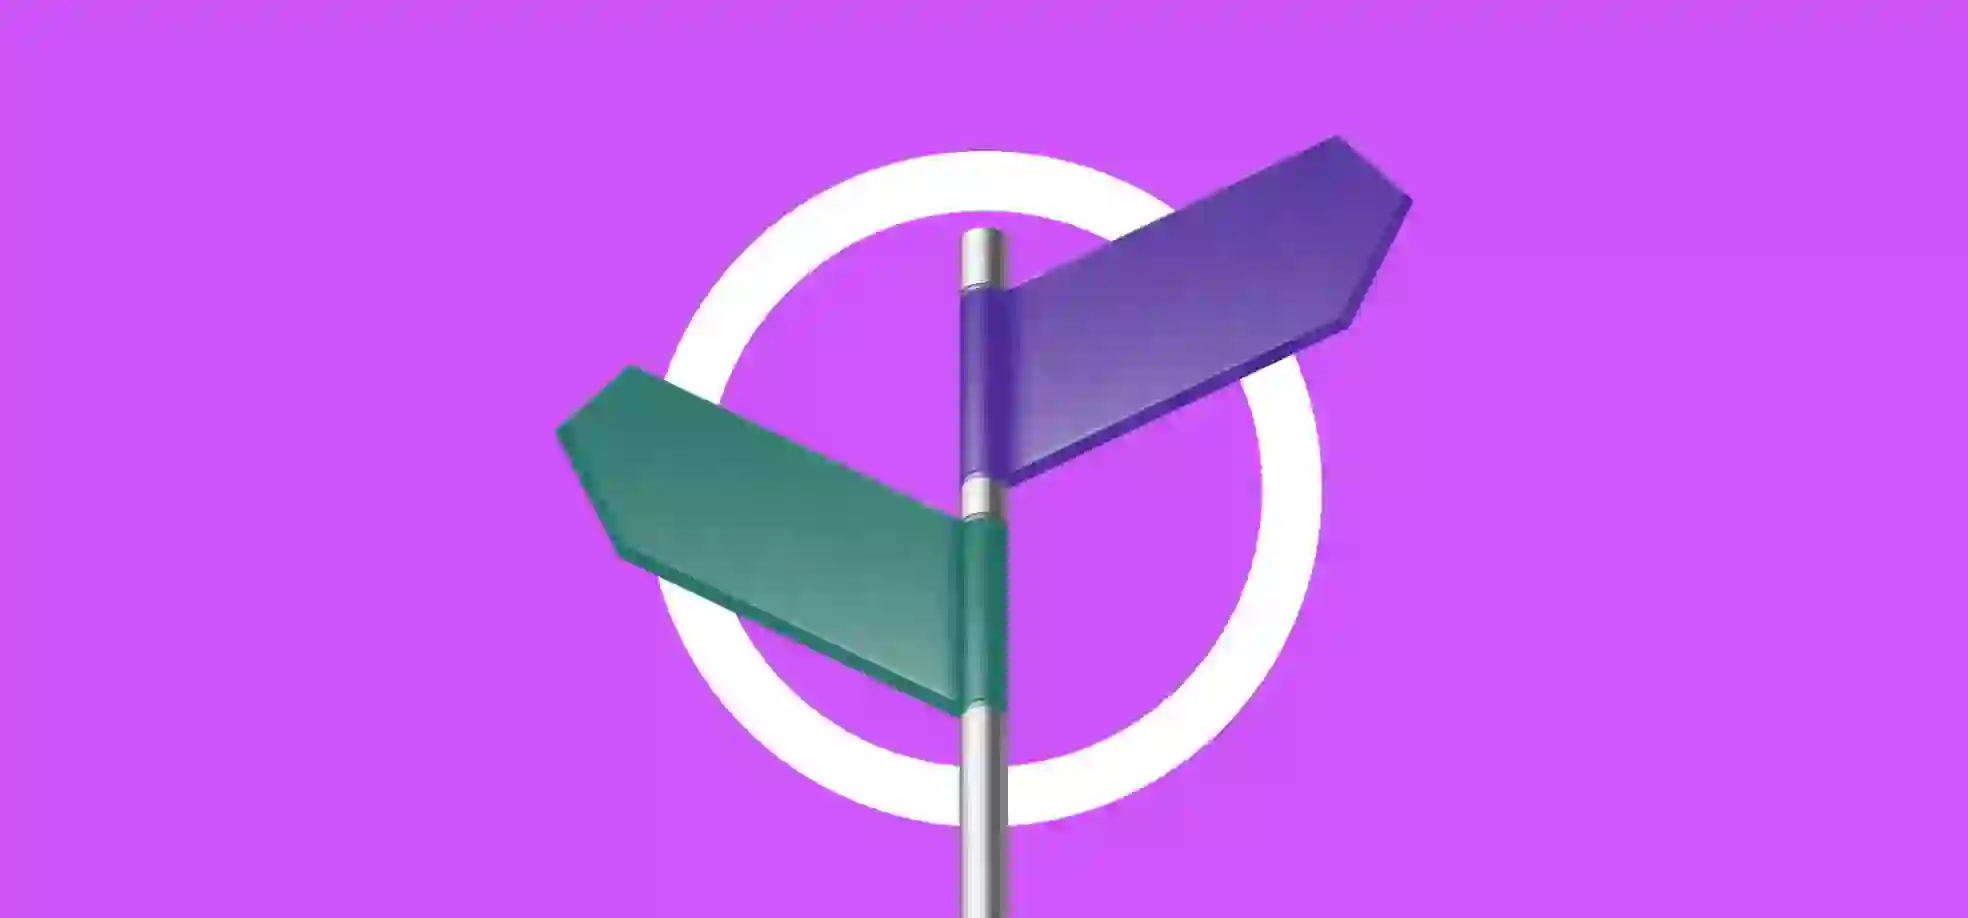 a direction board sign on a purple background 